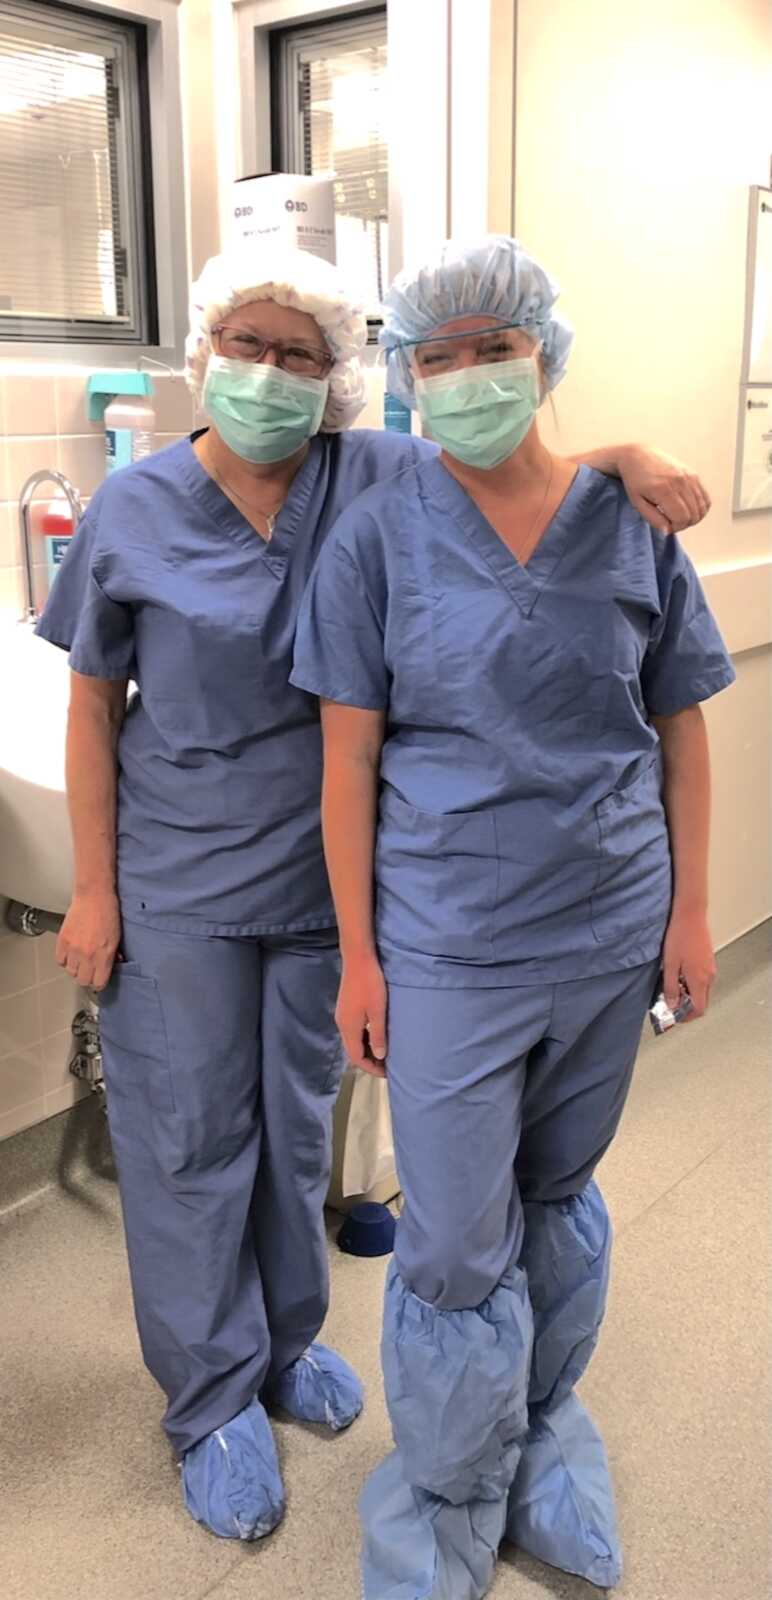 mother and daughter OBGYNs pose together in their scrubs and ppe